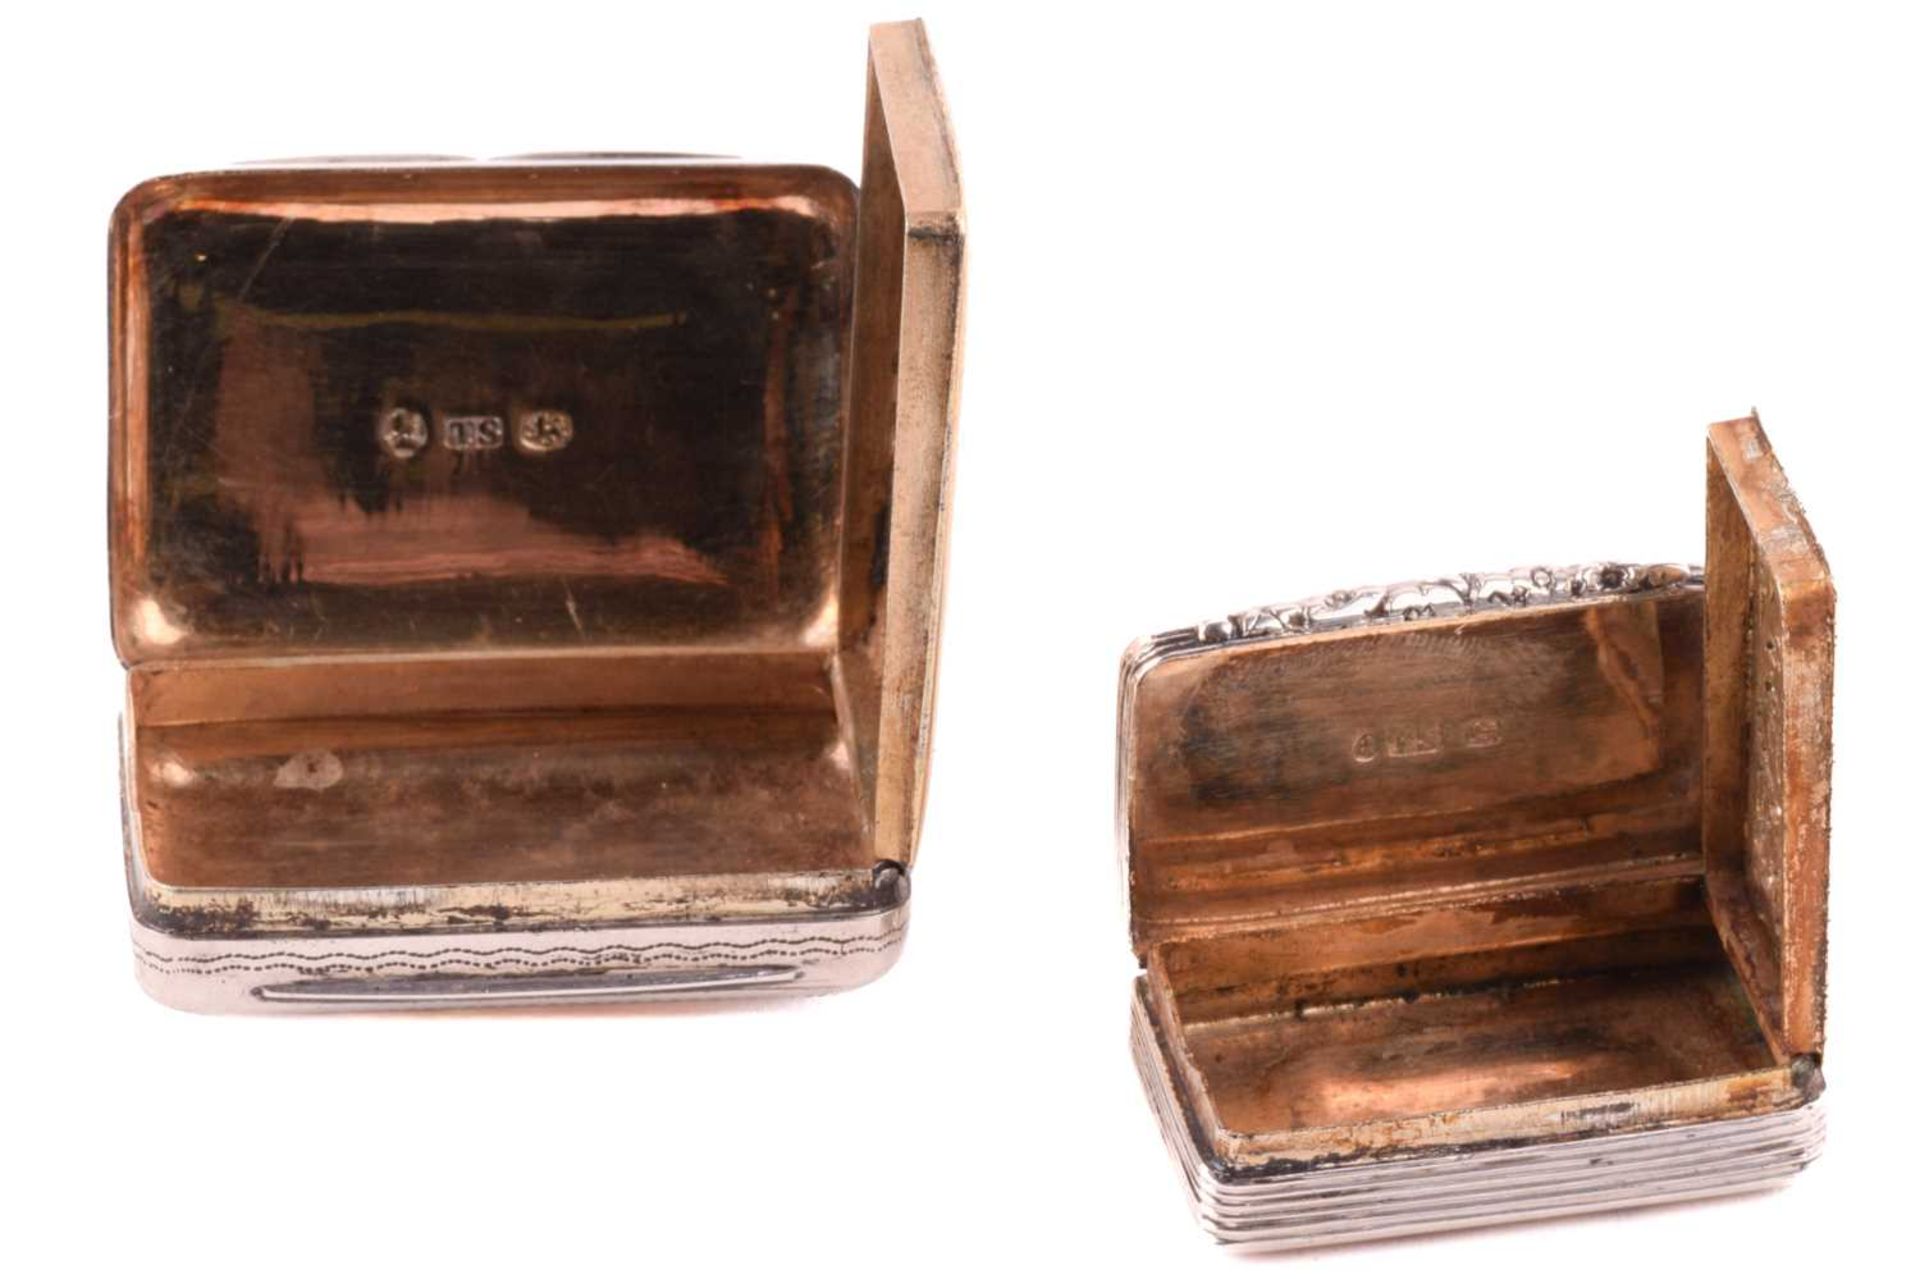 A William IV silver vinaigrette, Marked 'TS' possibly Thomas Smith, Birmingham 1829, of - Image 3 of 6